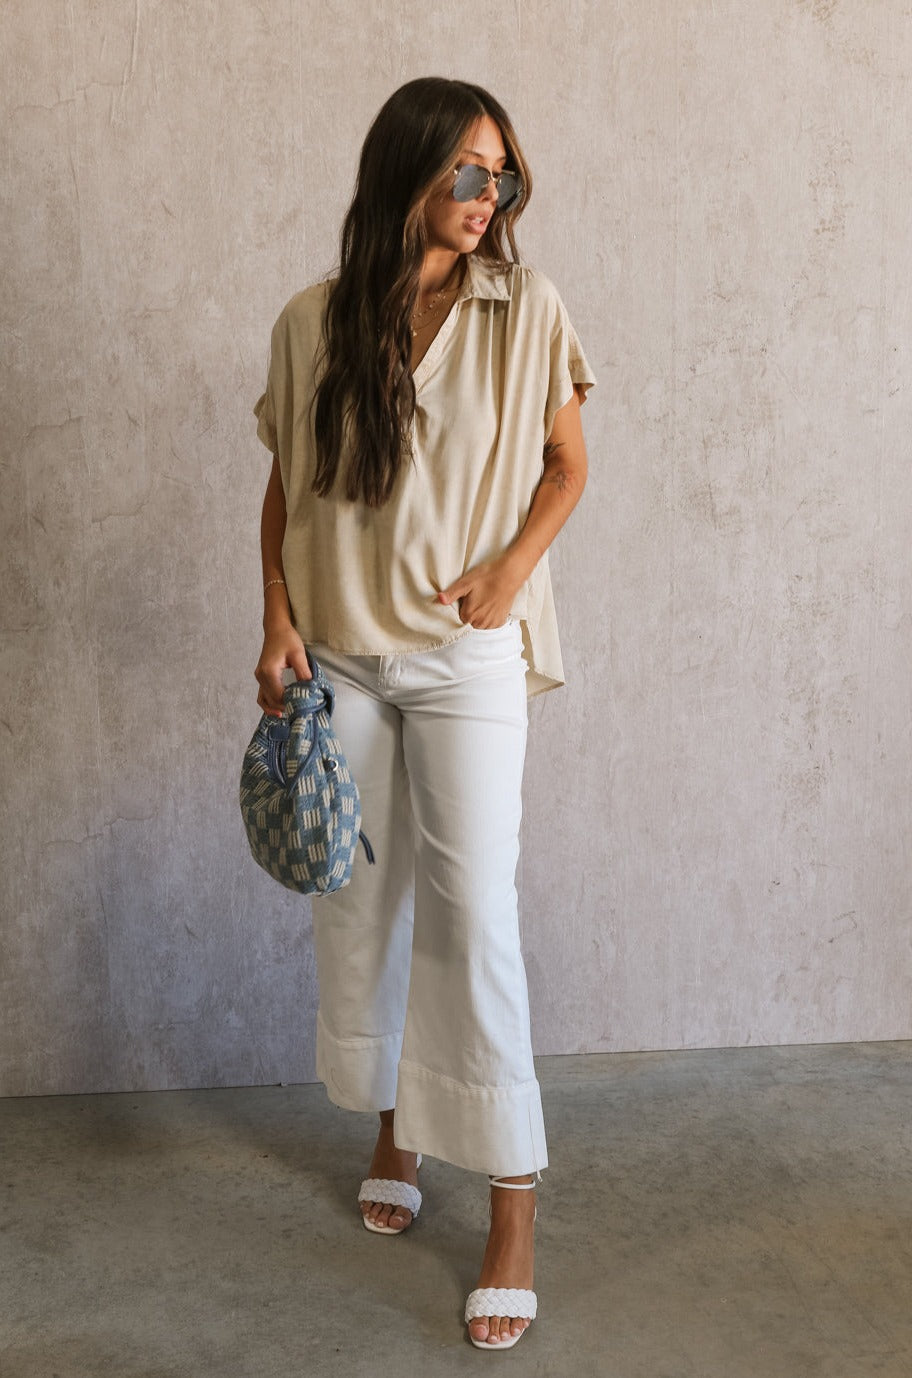 Full body front view of female model wearing the Amalia Collared Short Sleeve Top in taupe, which has short sleeves and a collar neckline. Paired with white capris. Model is holding blue purse.